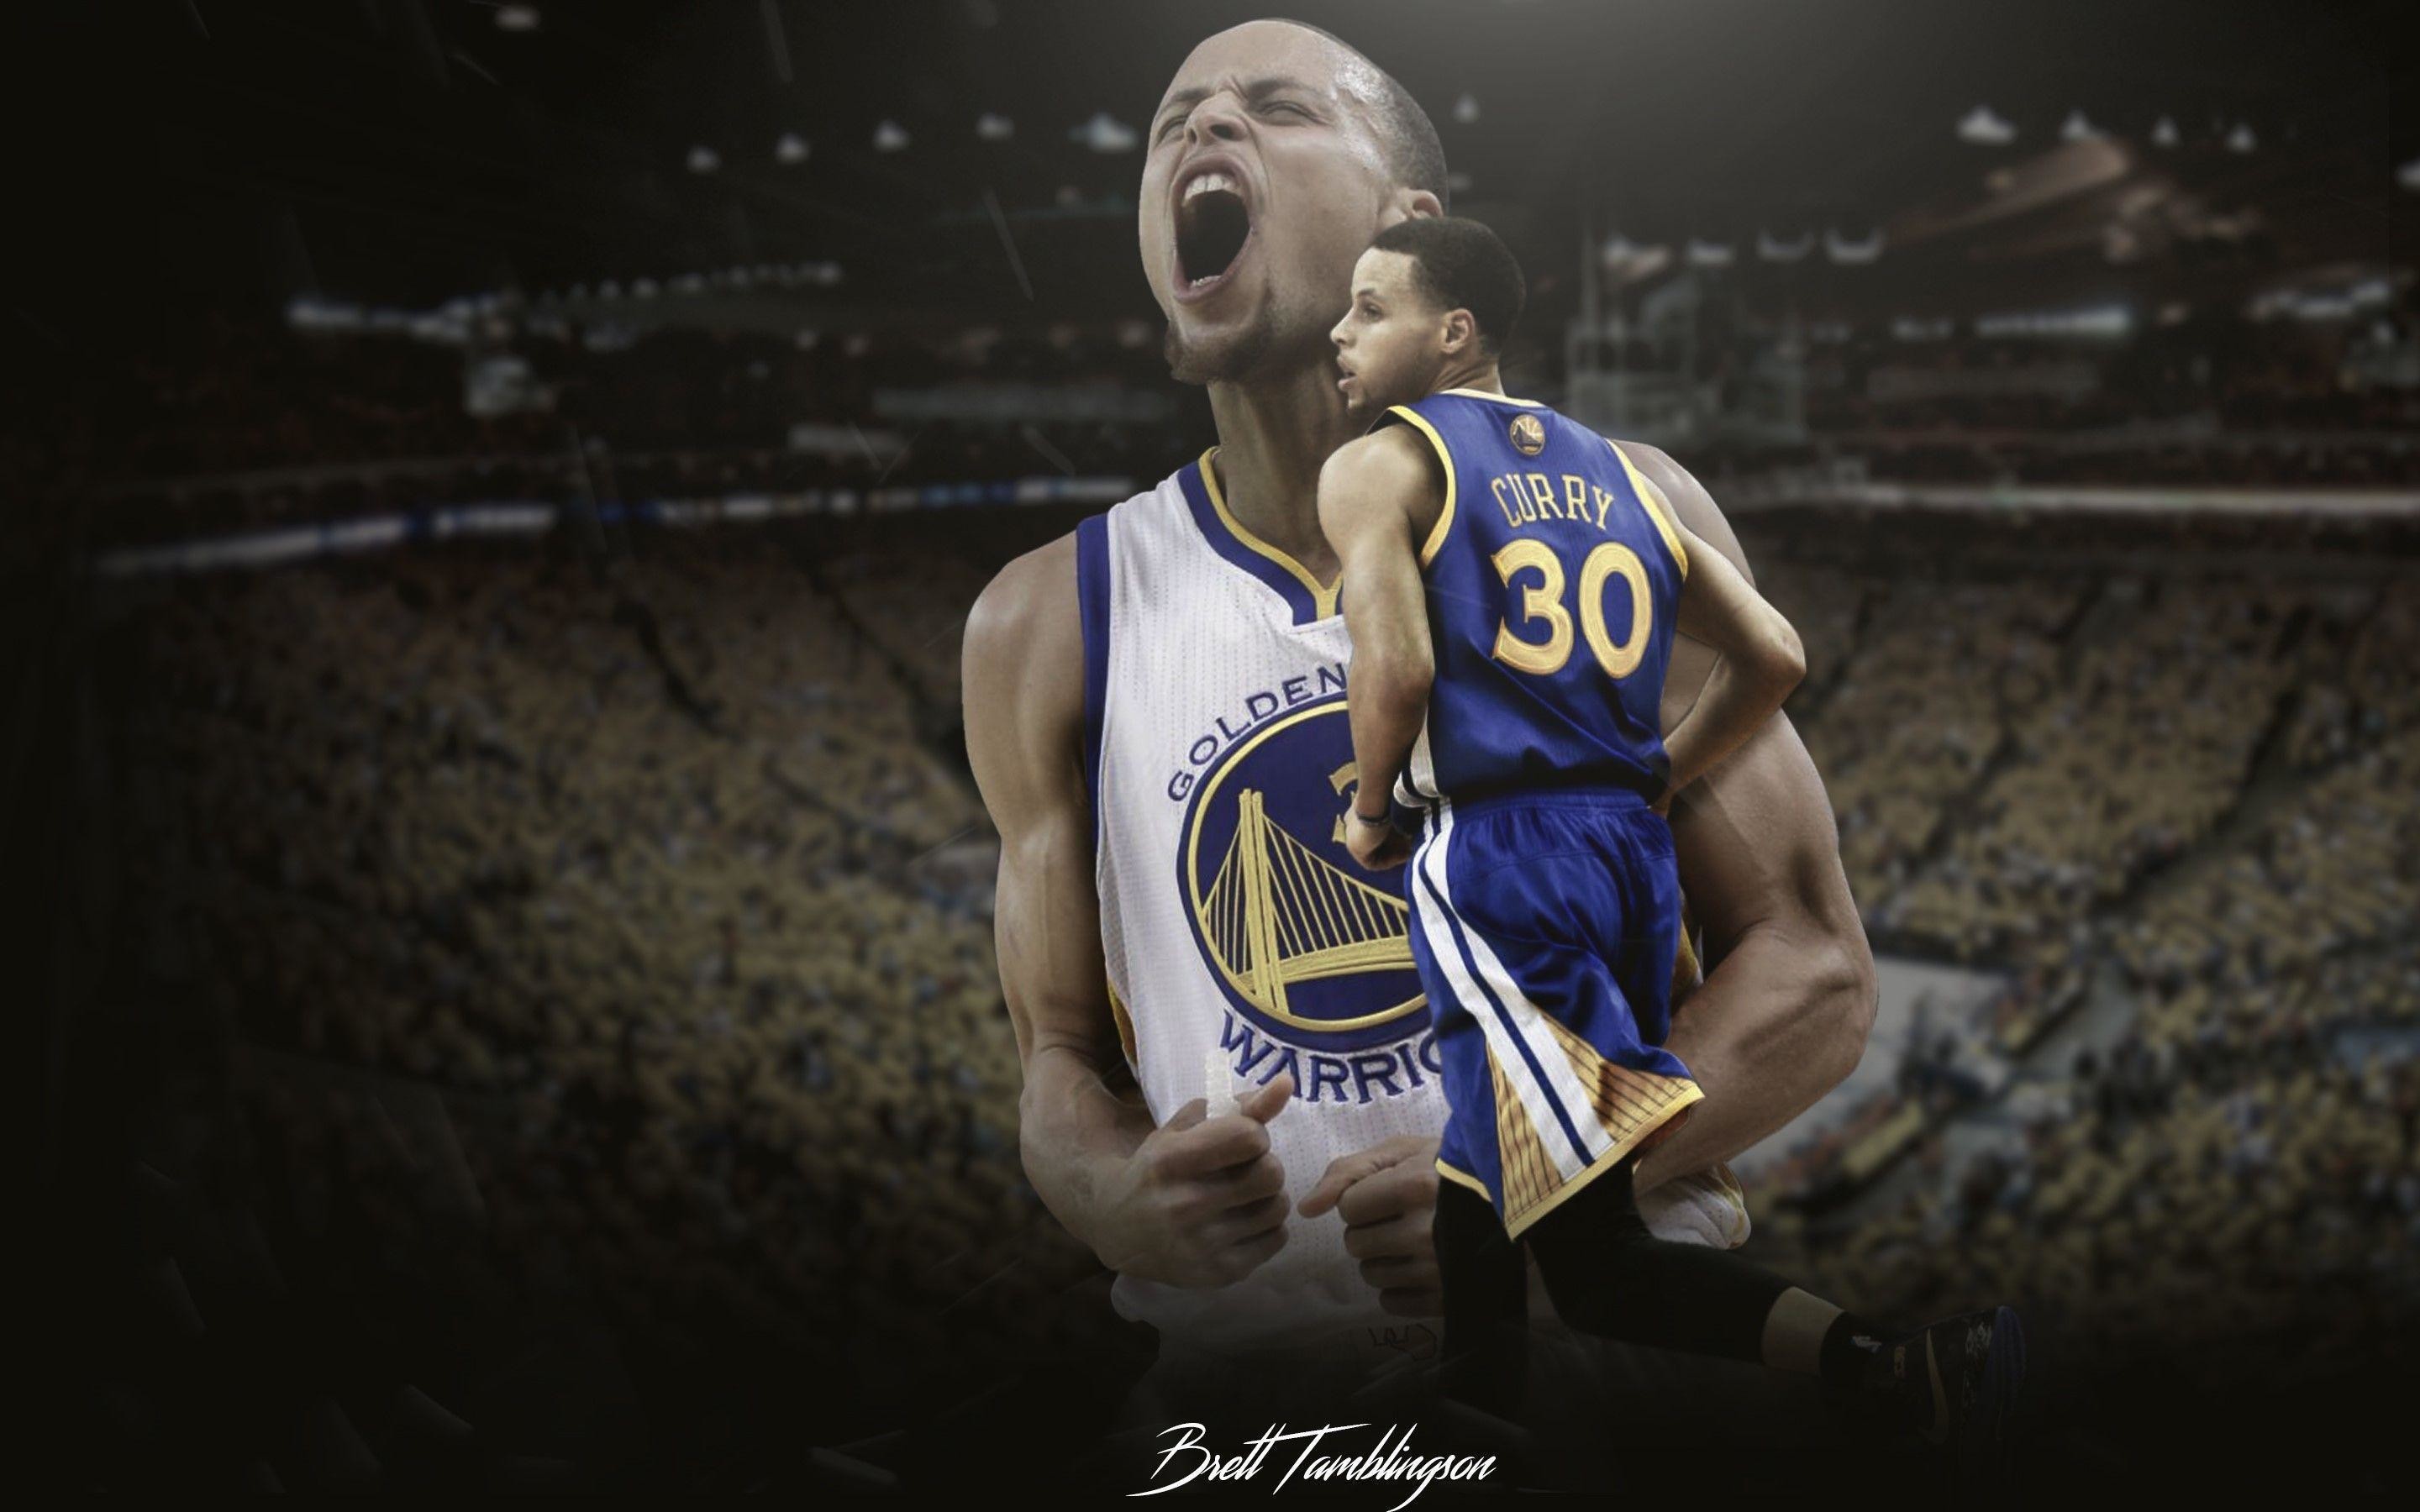 Amazoncom Steph Curry Night Night Poster Decorative Painting Canvas Wall  Posters and Art Picture Print Modern Family Bedroom Decor Posters  16x24inch40x60cm Posters  Prints